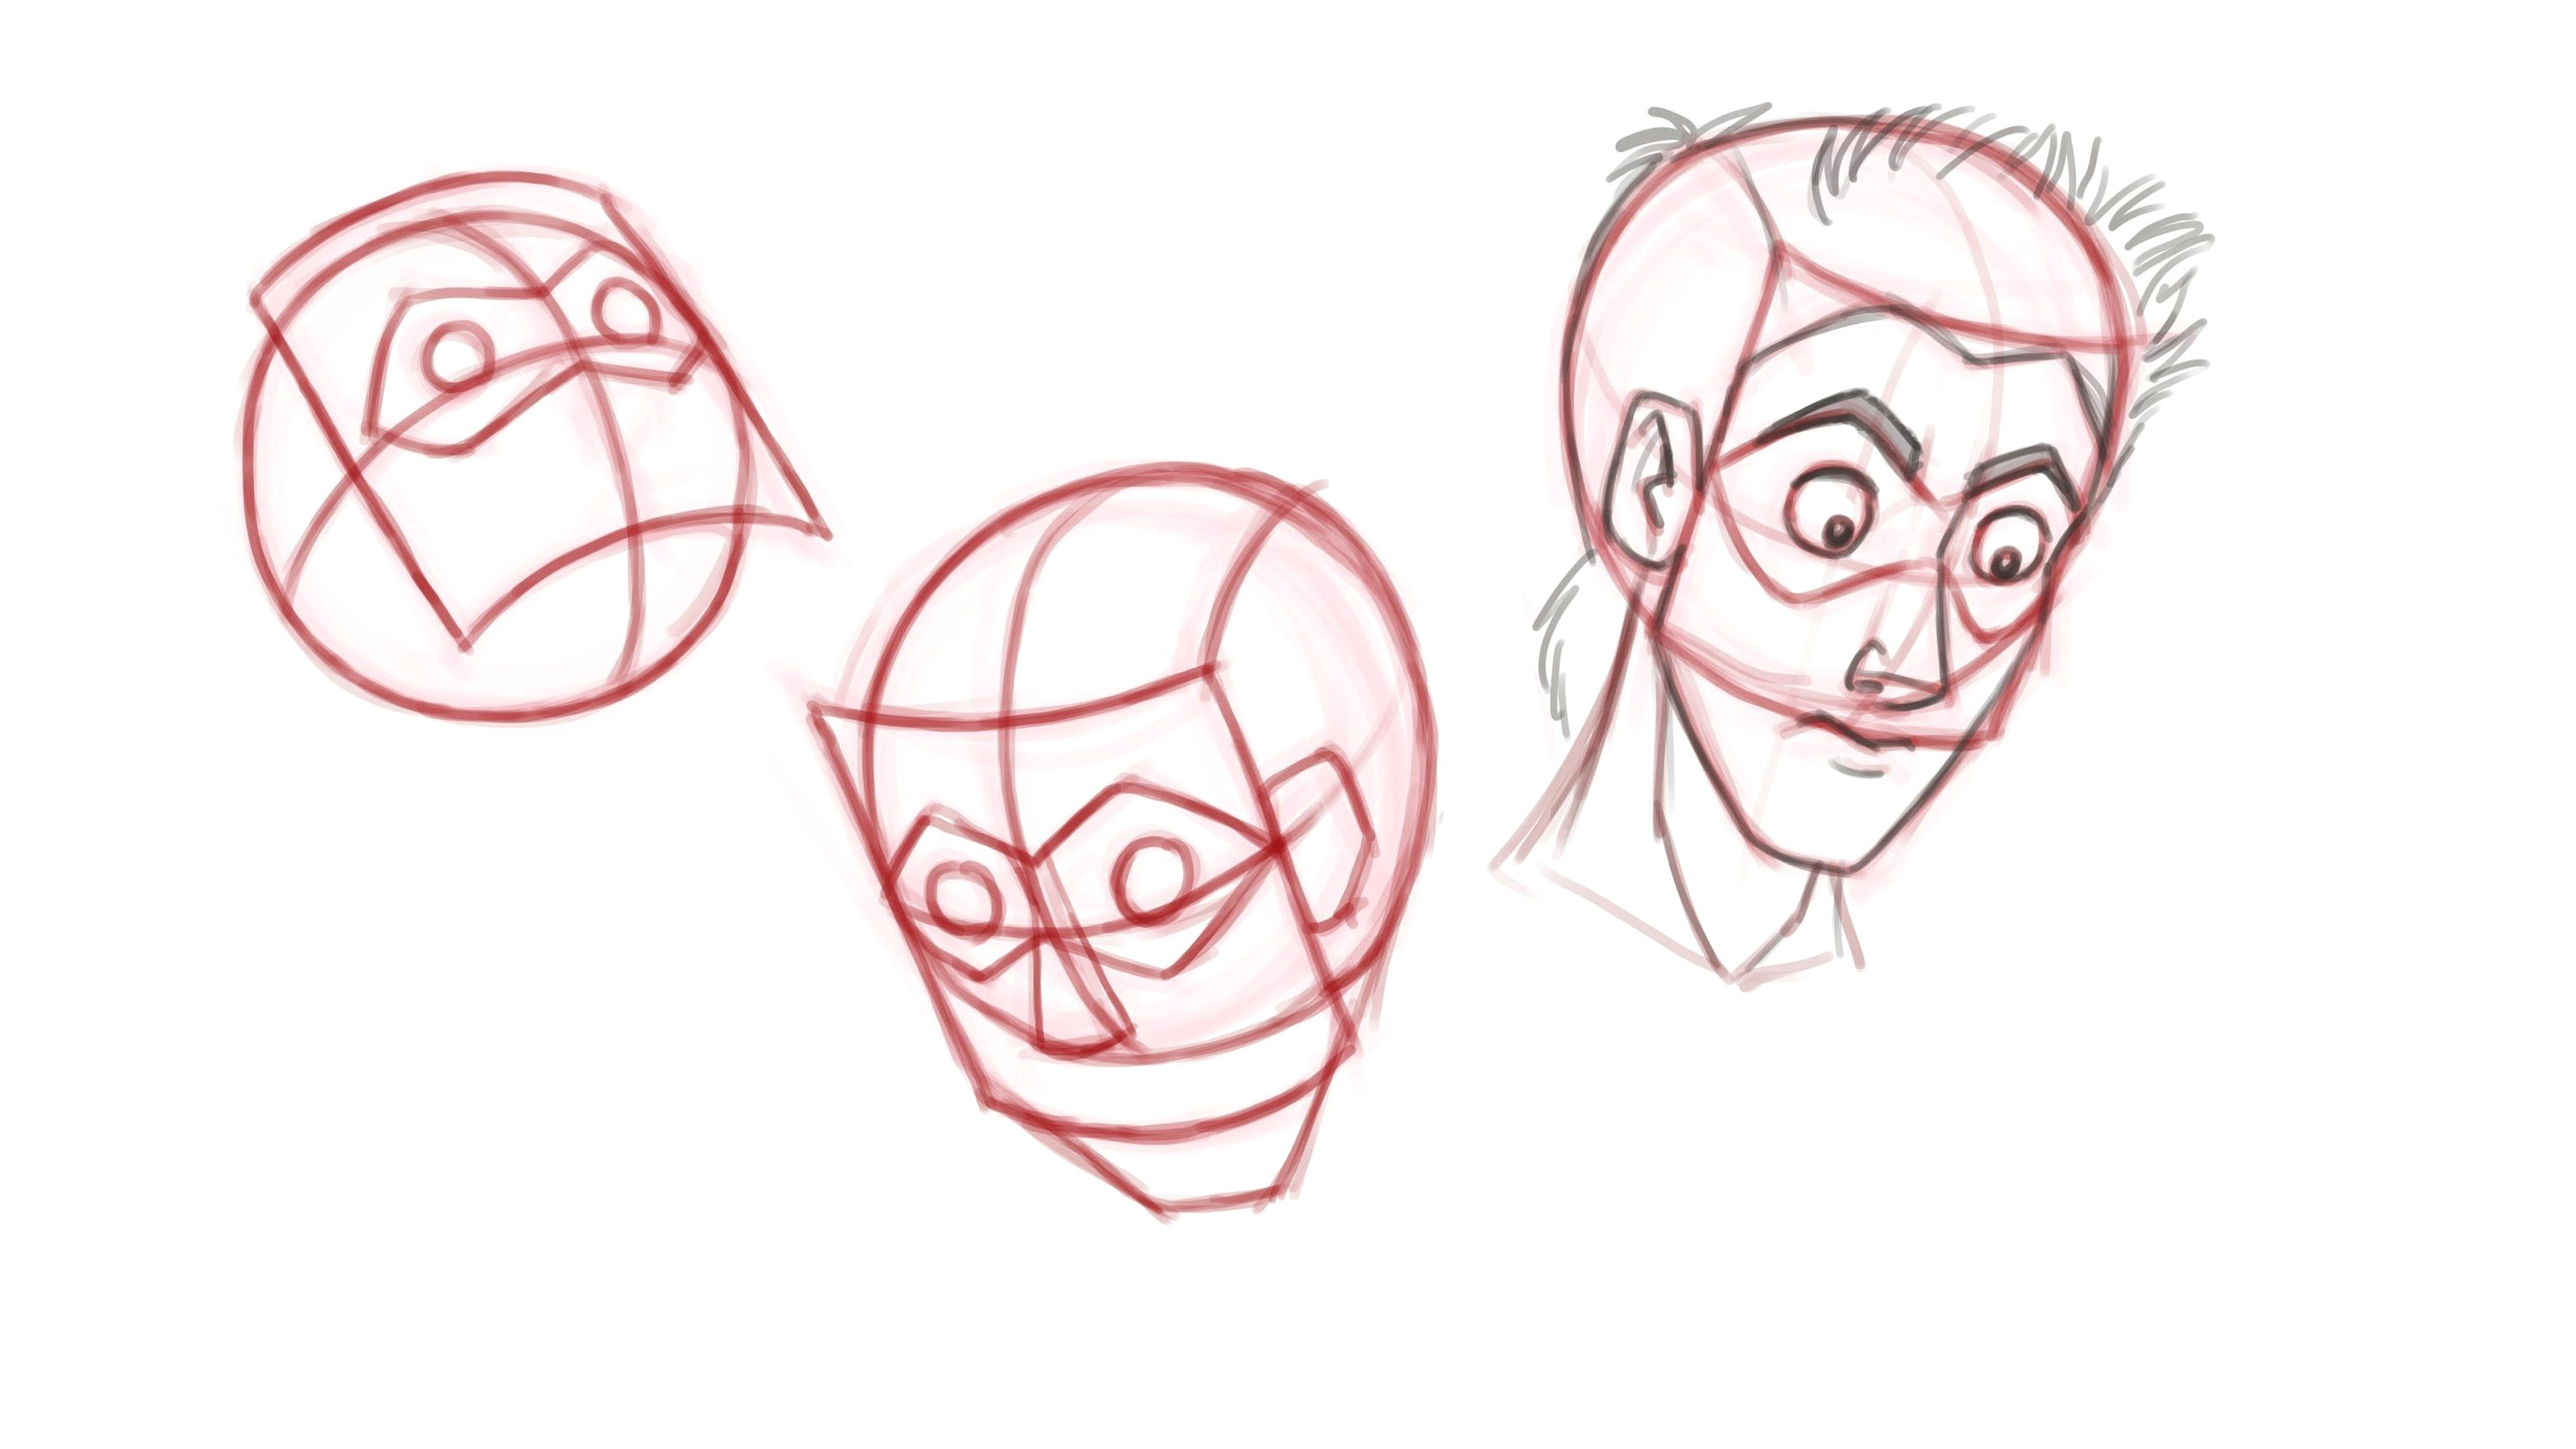 Drawing A Simple Cartoon Face Drawn Animation Tutorial How to Animate Heads Drawing Faces From